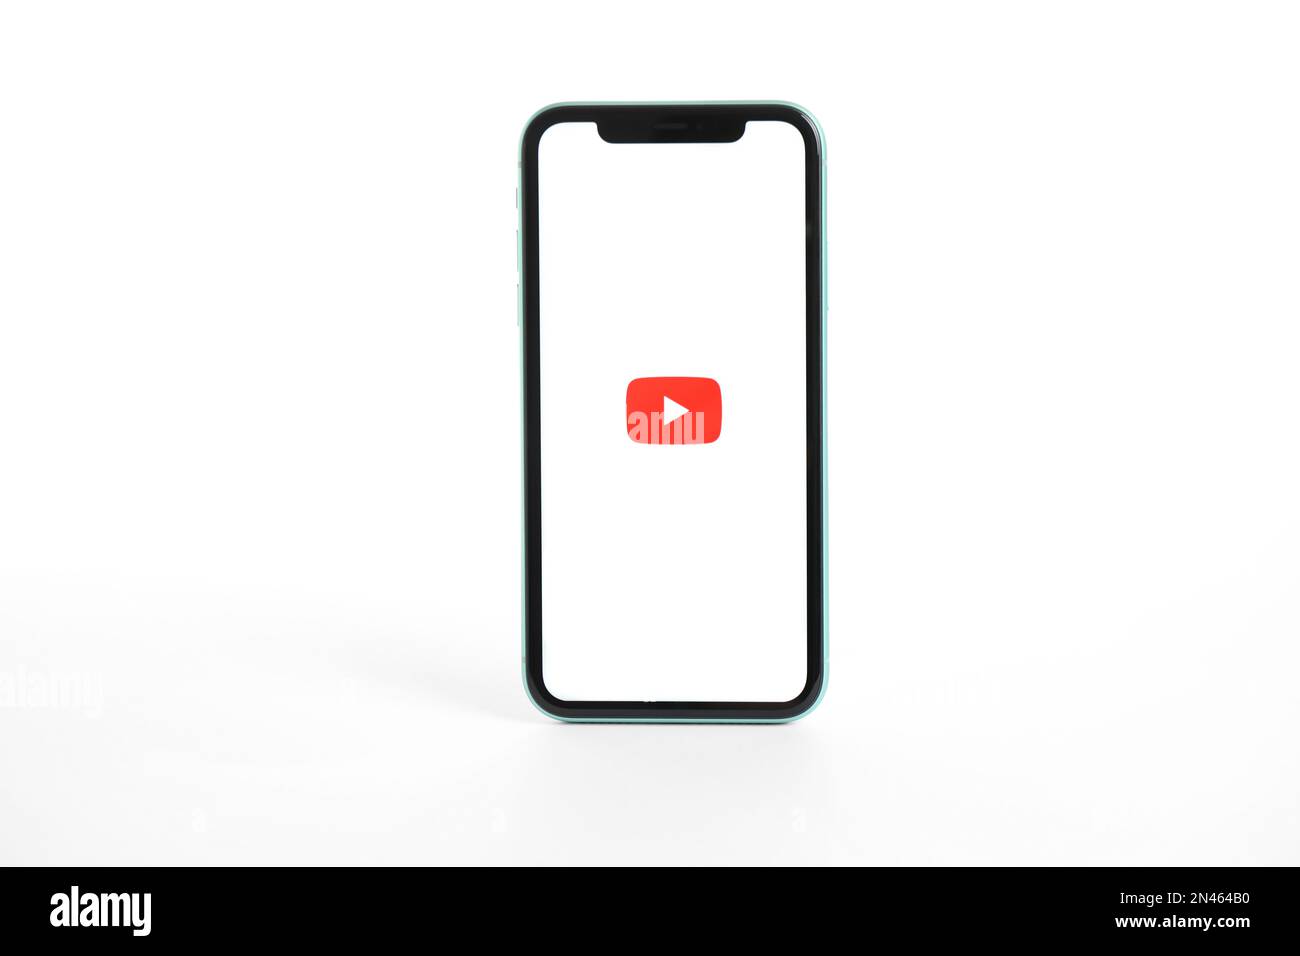 MYKOLAIV, UKRAINE - JULY 9, 2020: iPhone 11 with Youtube app on screen against white background Stock Photo